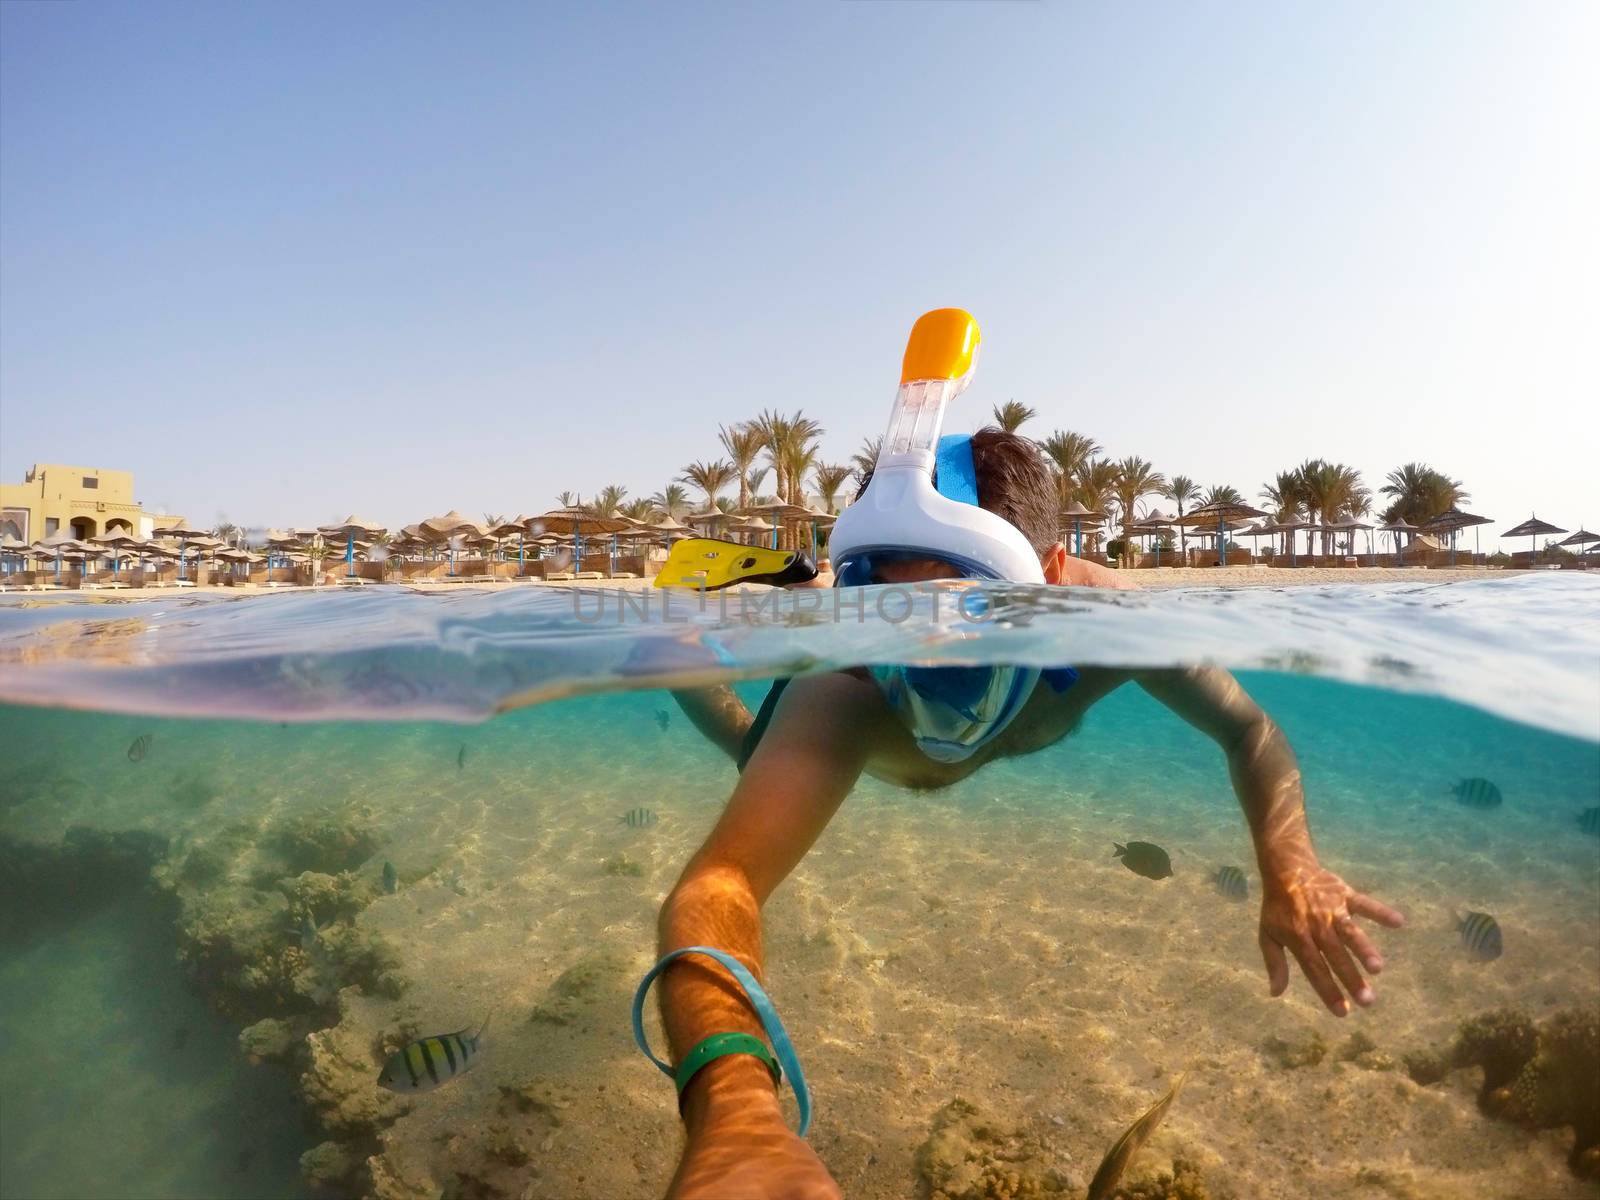 Snorkel swim in underwater exotic tropics paradise with fish and coral reef, beautiful view of tropical sea. Marsa alam, Egypt. Summer holiday vacation concept